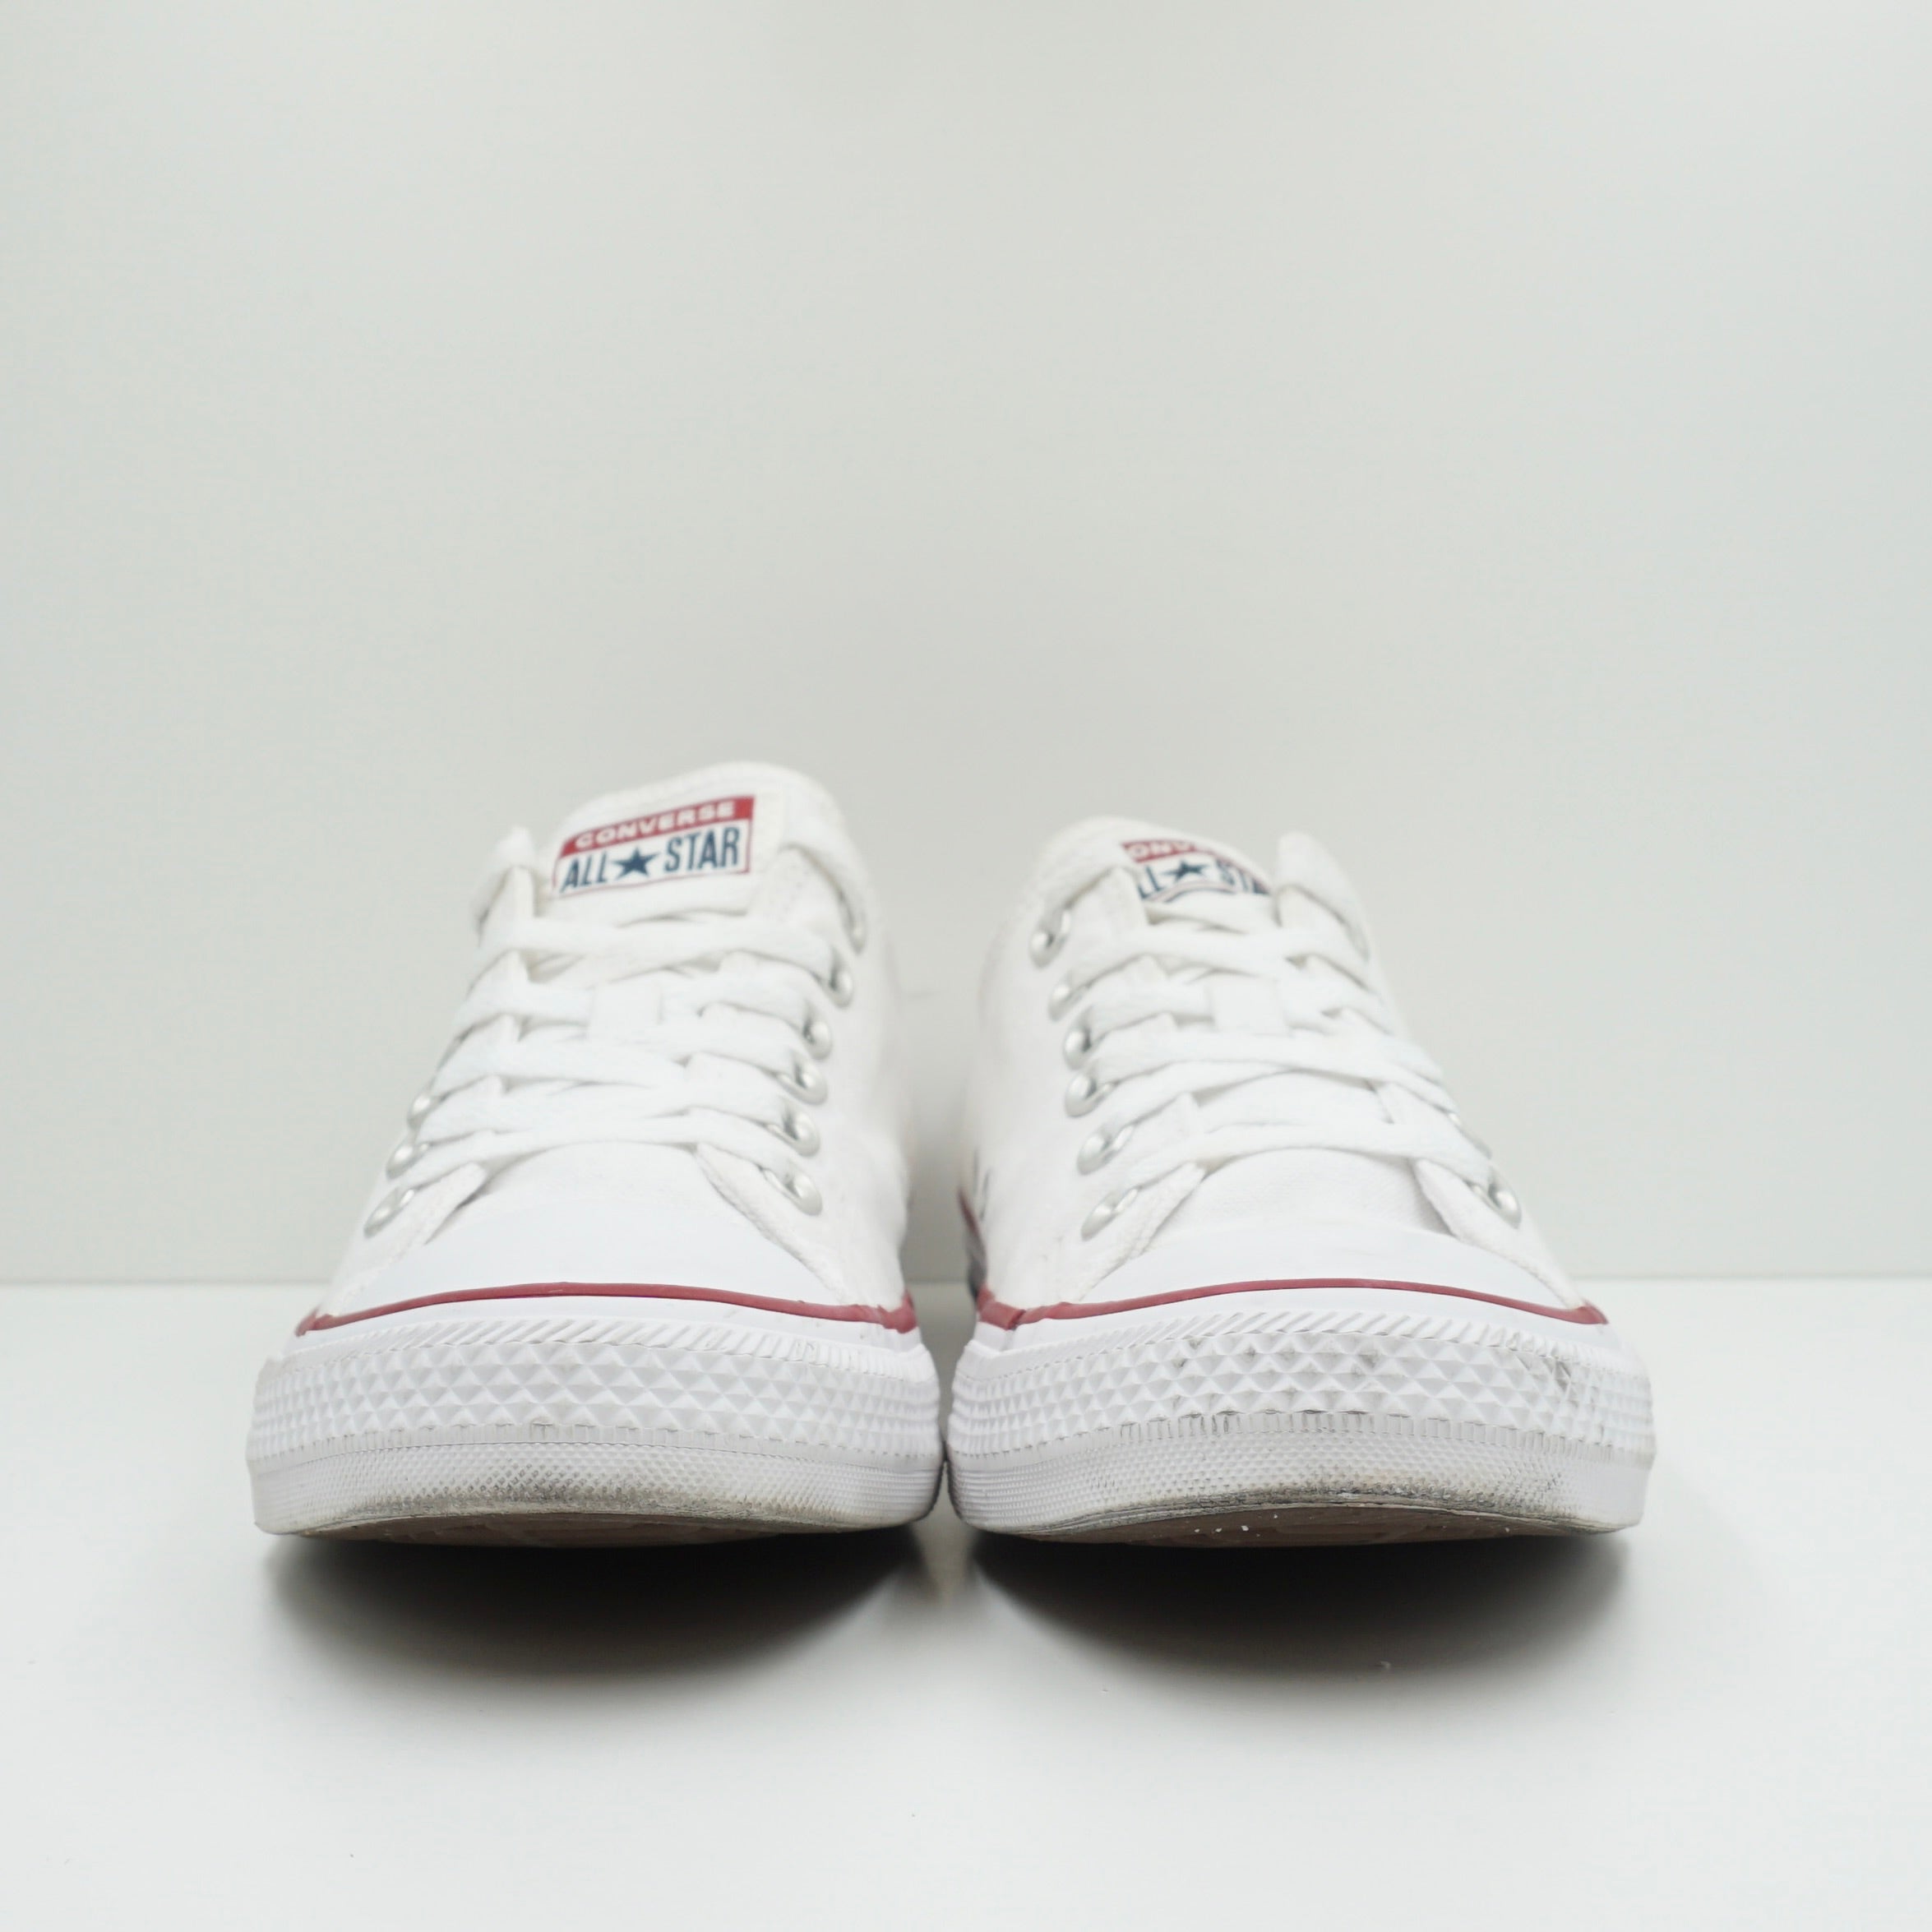 Converse Chuck Taylor All Star Low OX White